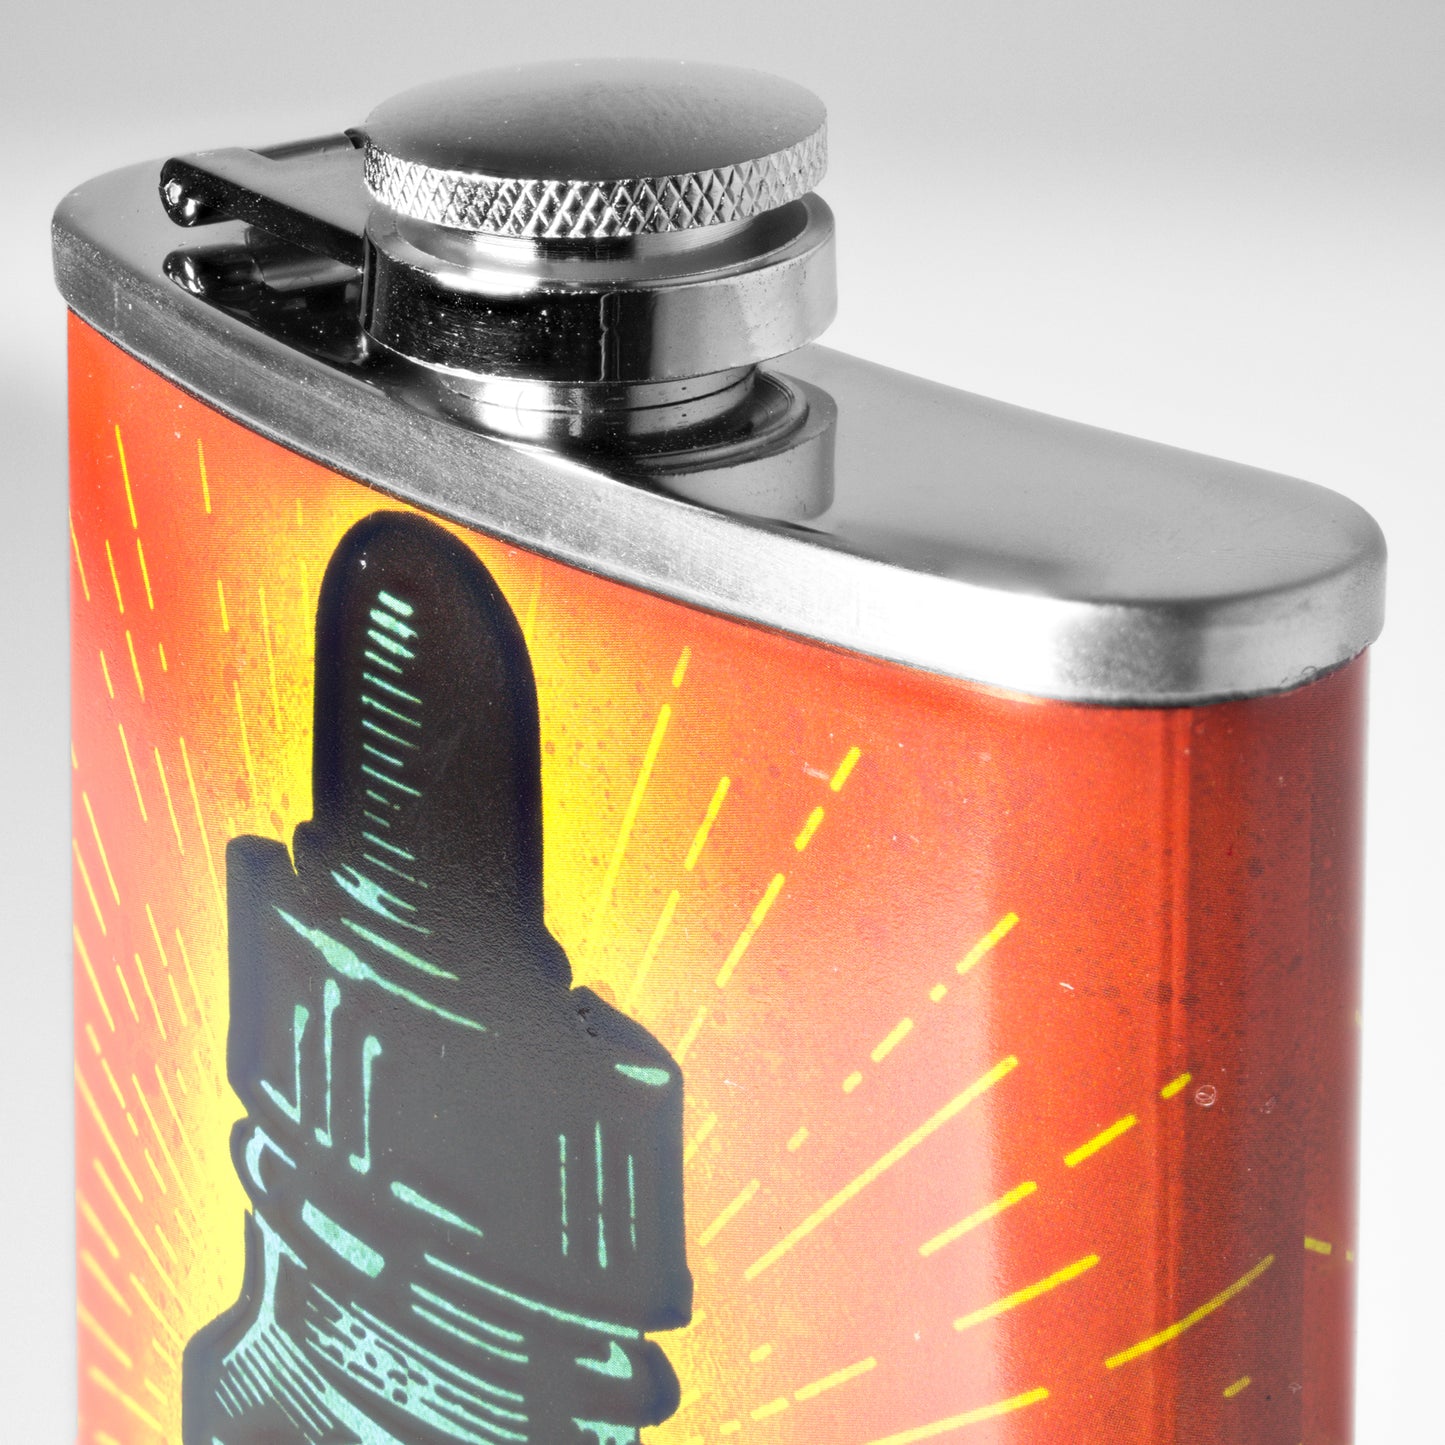 Love Potion No. 9 Stainless Steel 8 oz Liquor Flask